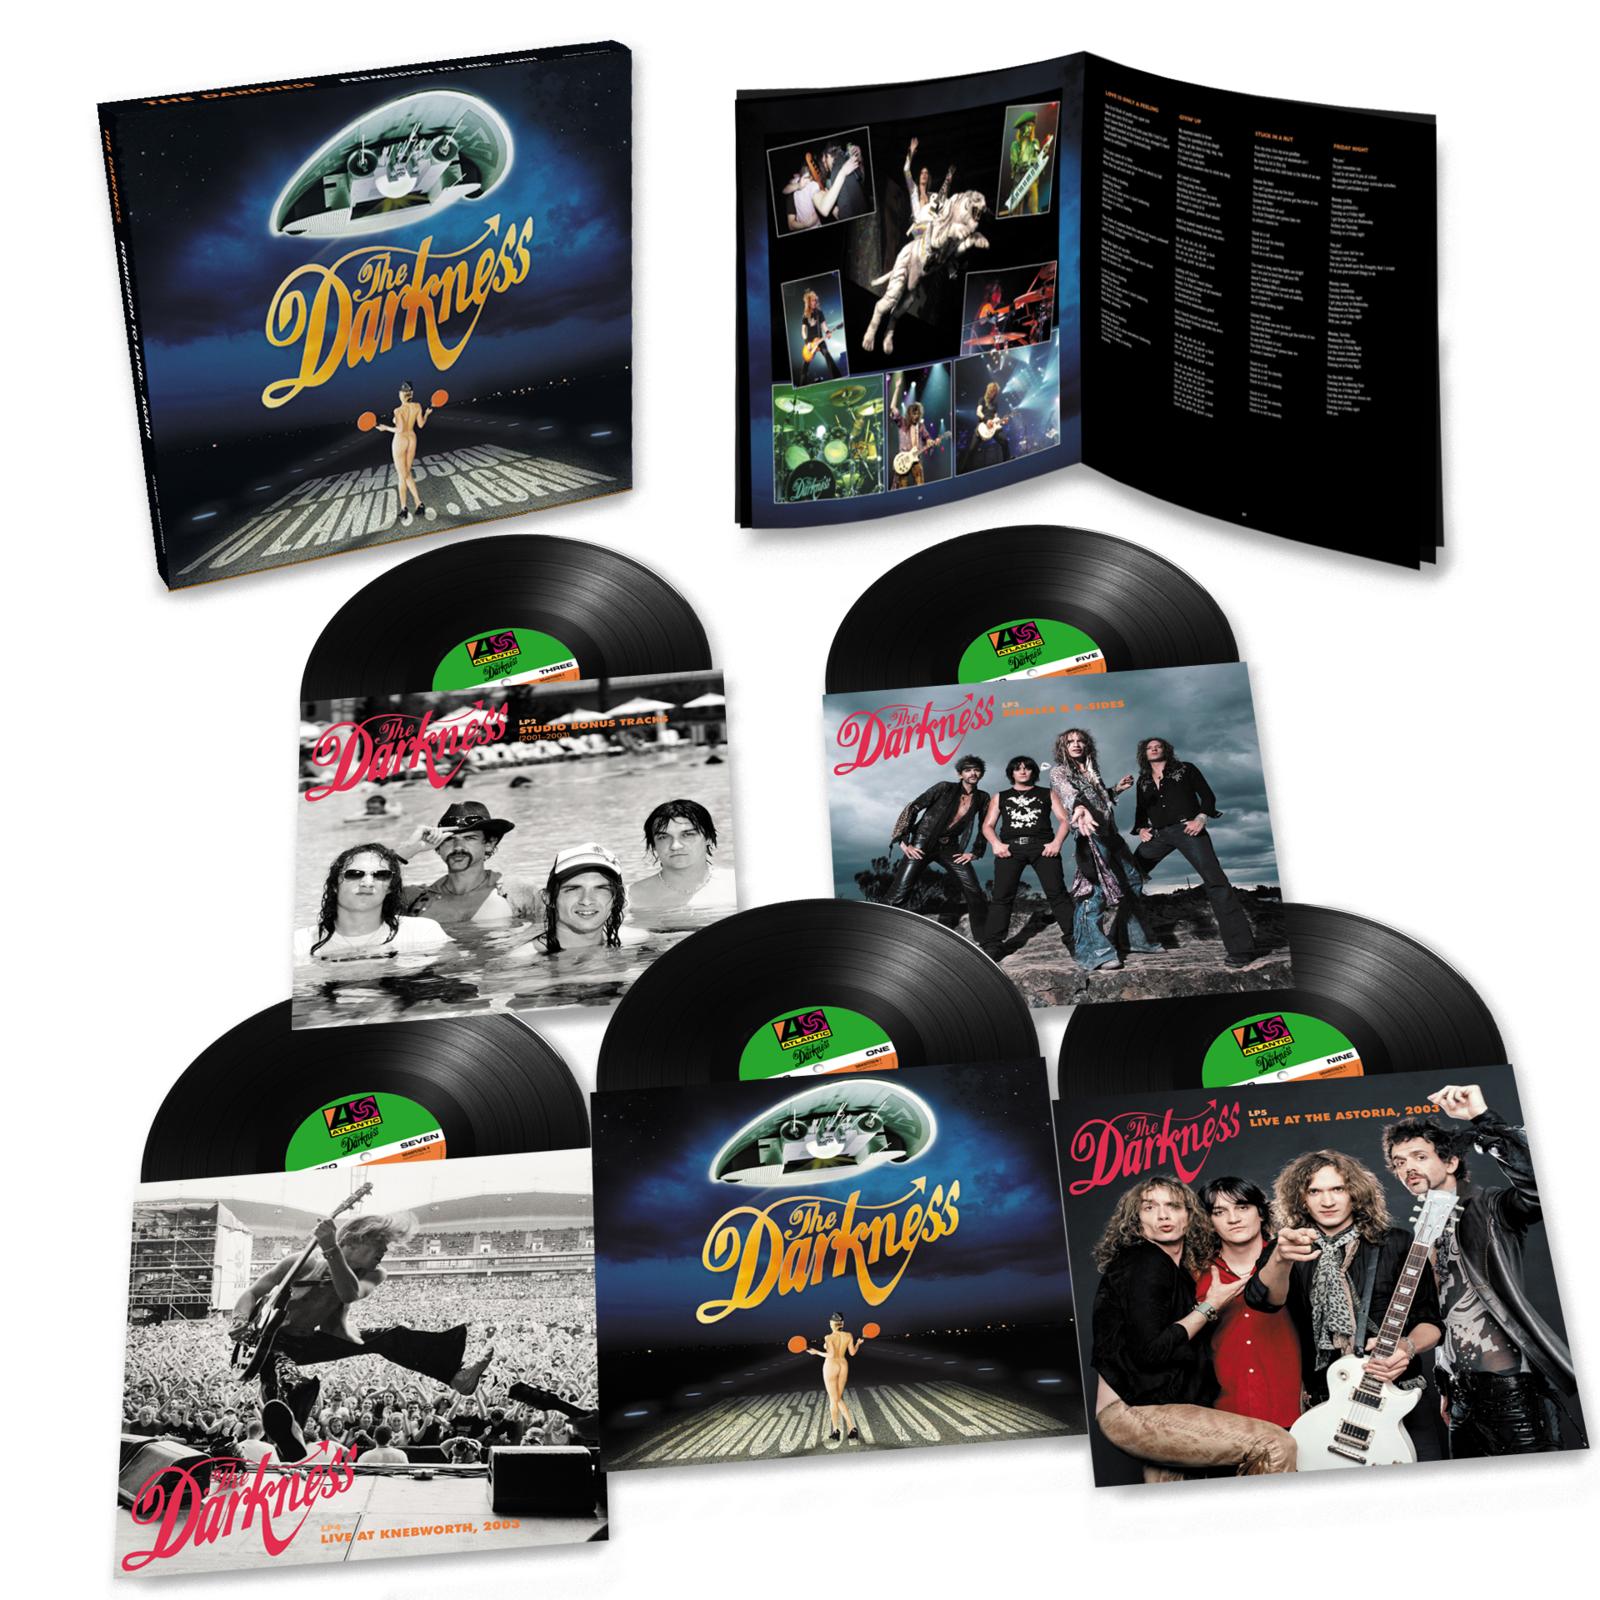 THE DARKNESS - Permission To Land… Again (20th Anniversary Deluxe Edition) - 5LP - Black Vinyl Box Set